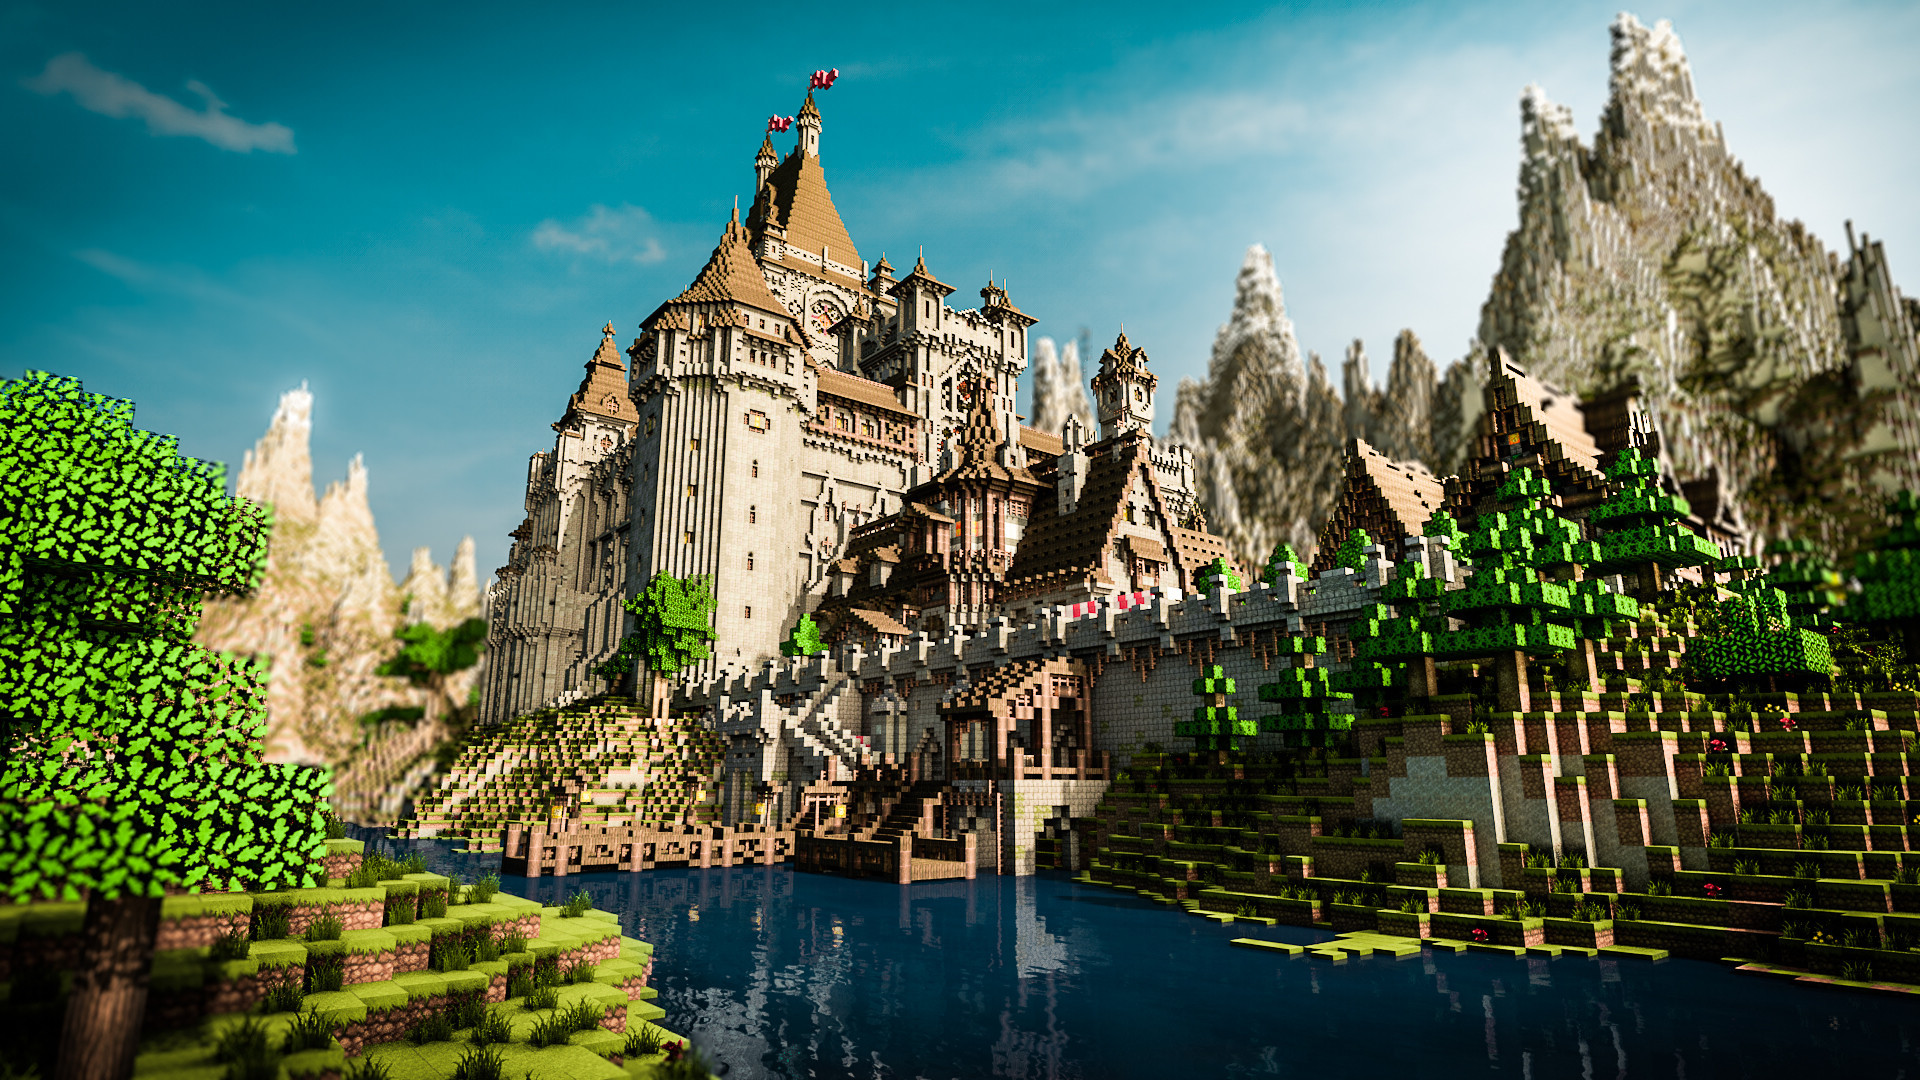 1920x1080 I just finished my first ever minecraft Render/Wallpaper. What do you think?